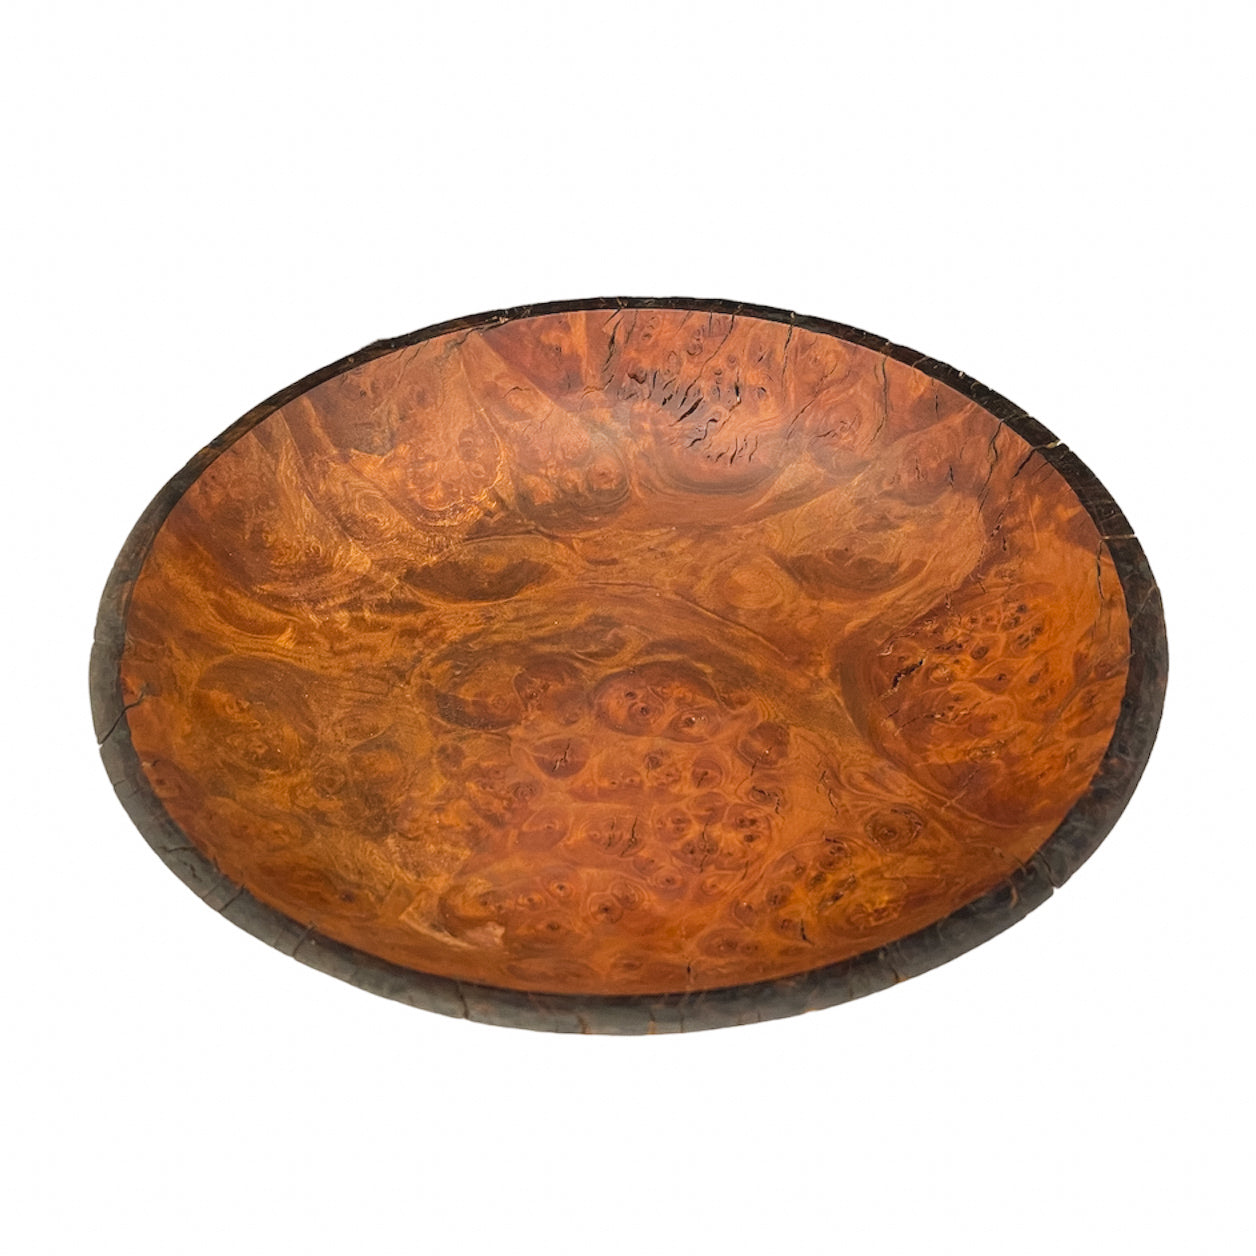 "TADHG" OPEN WOOD BOWL